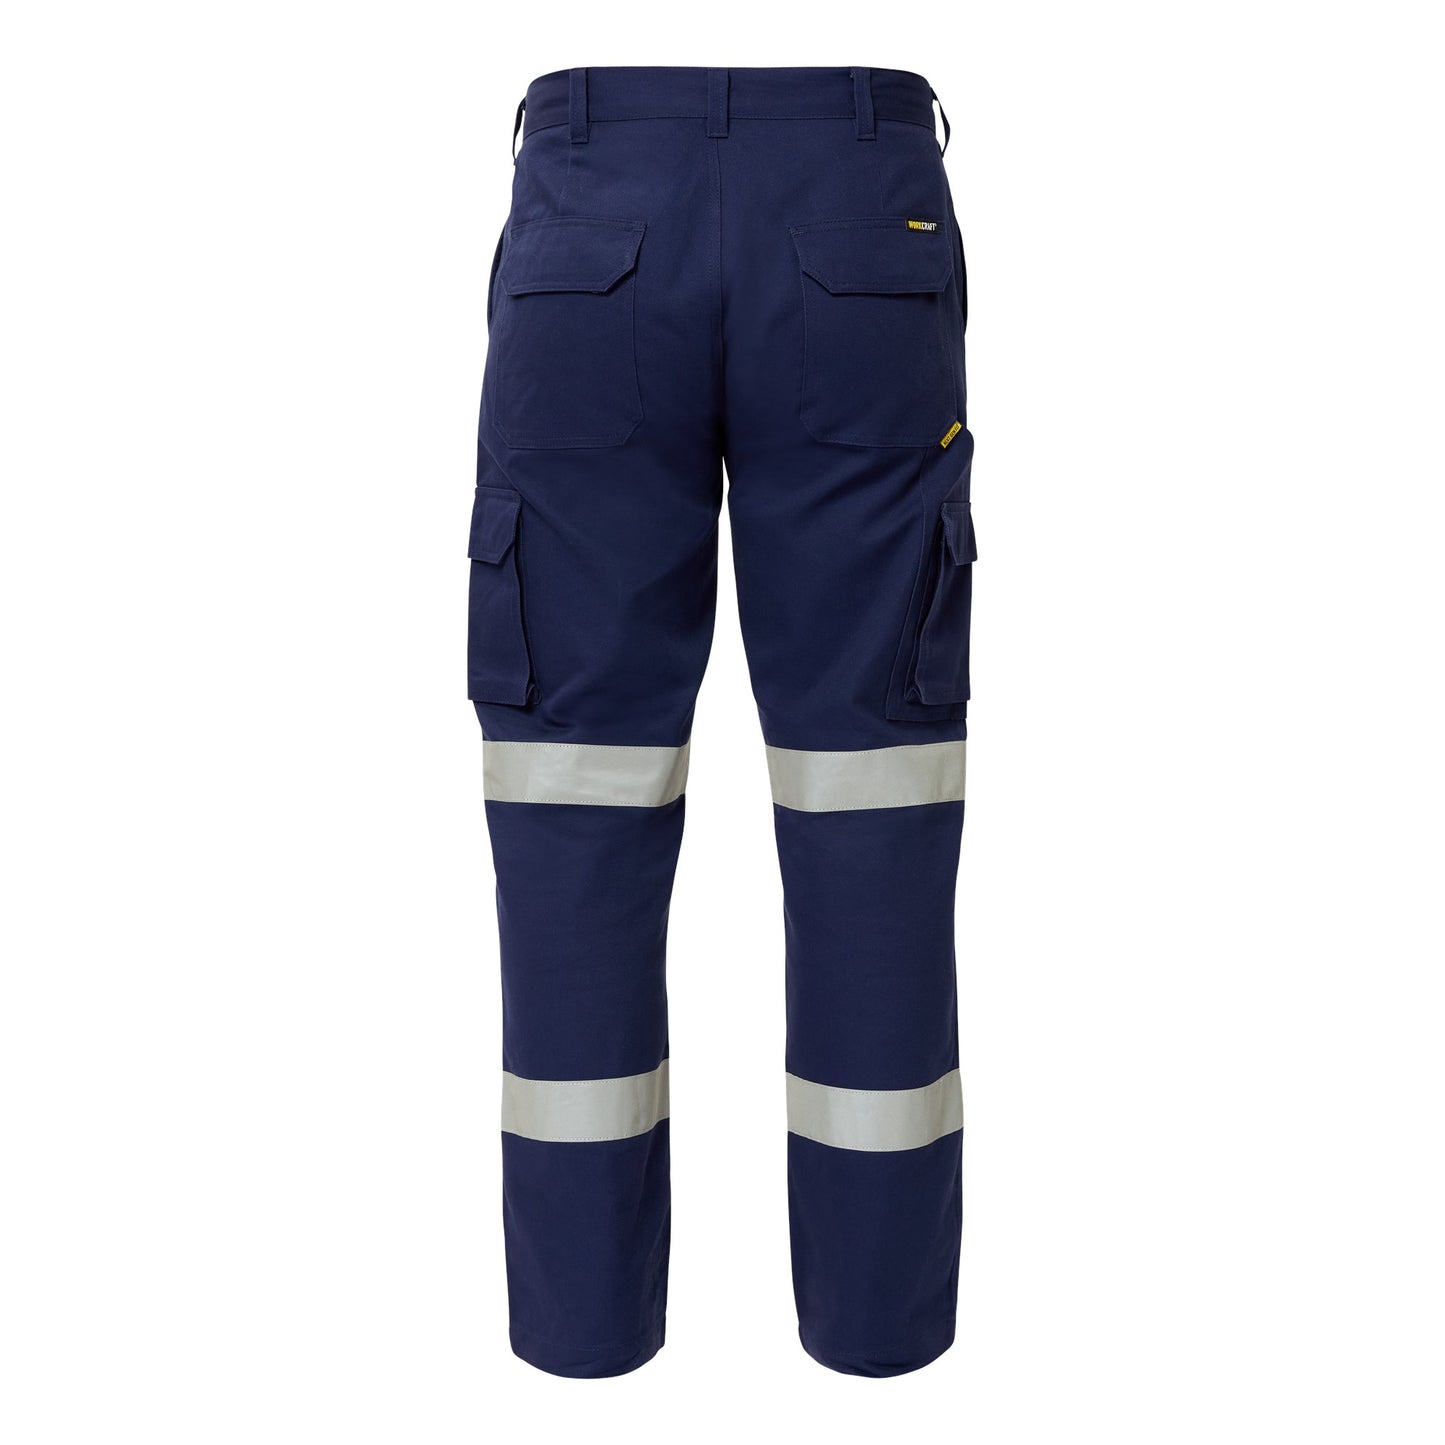 Workcraft-Next Gen Cot Drill Pant W/Tape - WP4017